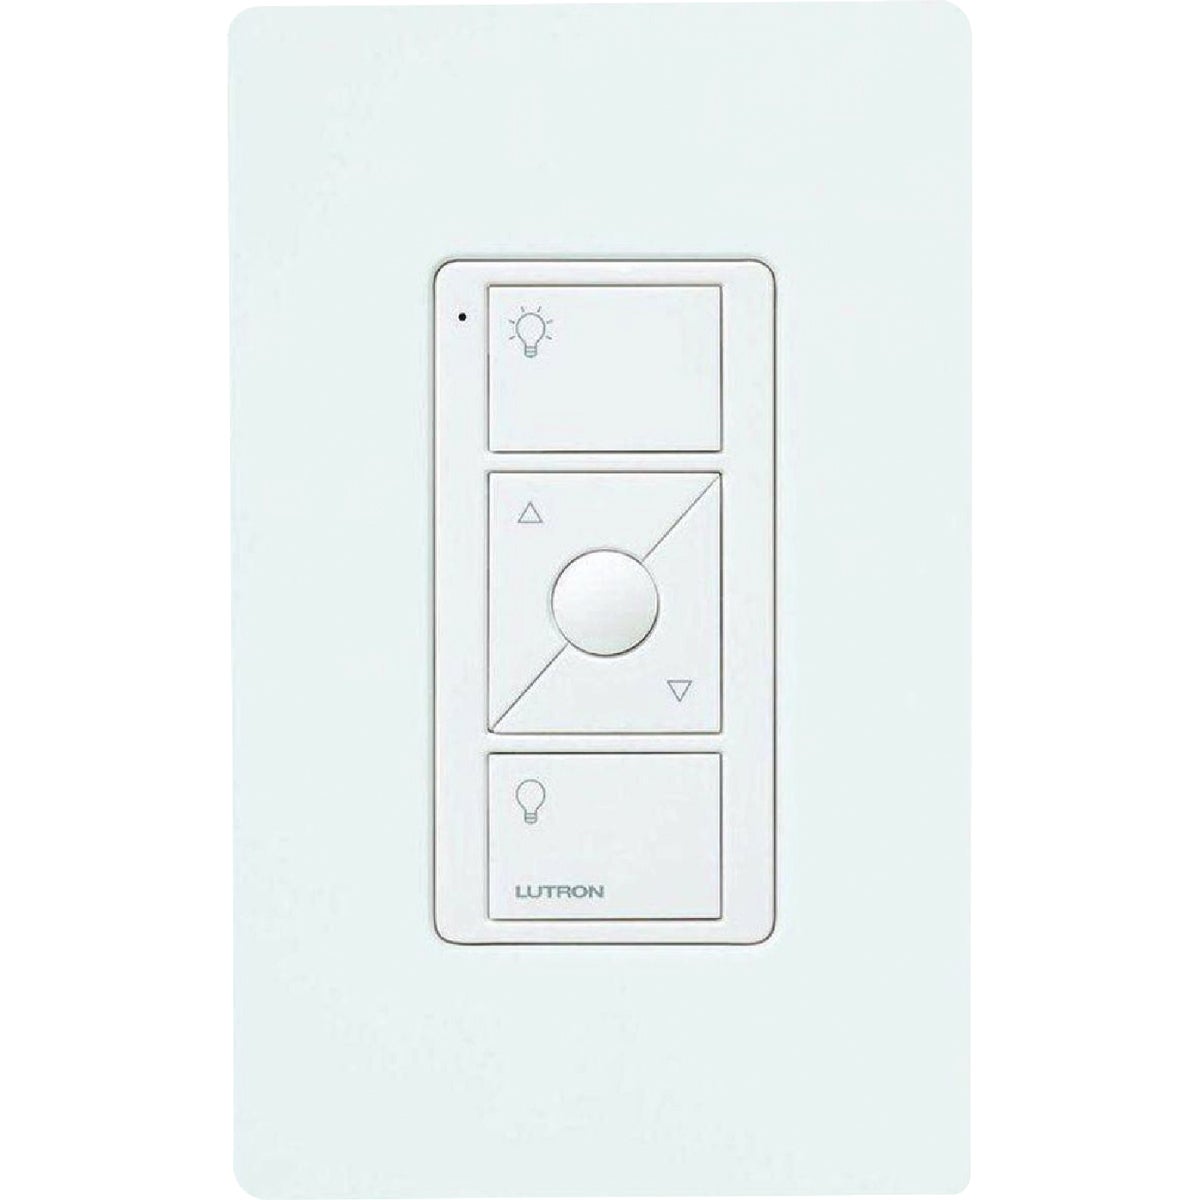 Dimmer Remote Control